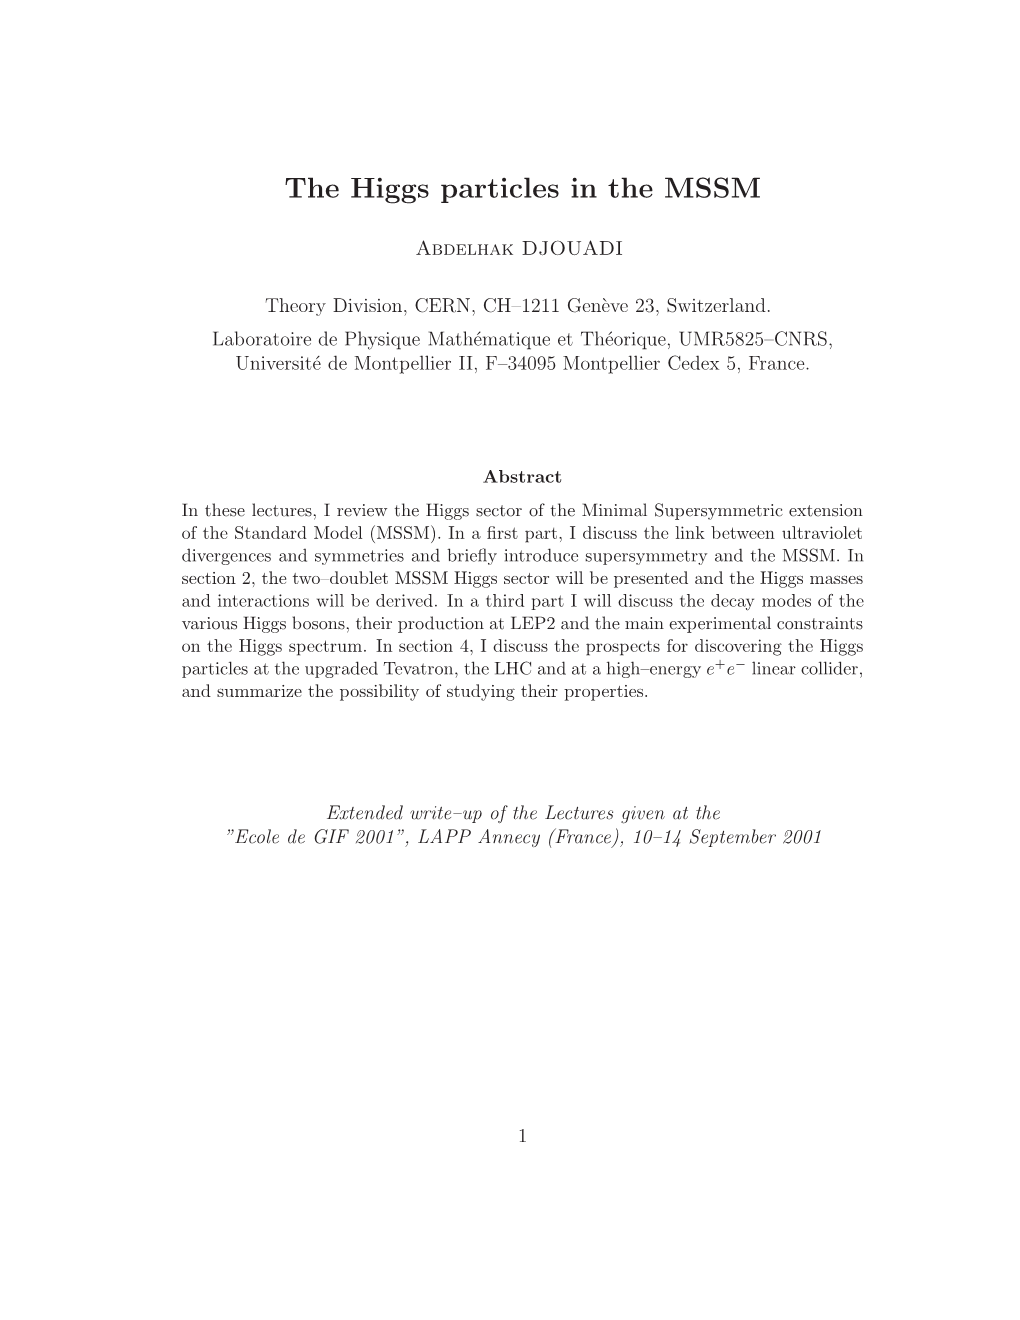 The Higgs Particles in the MSSM